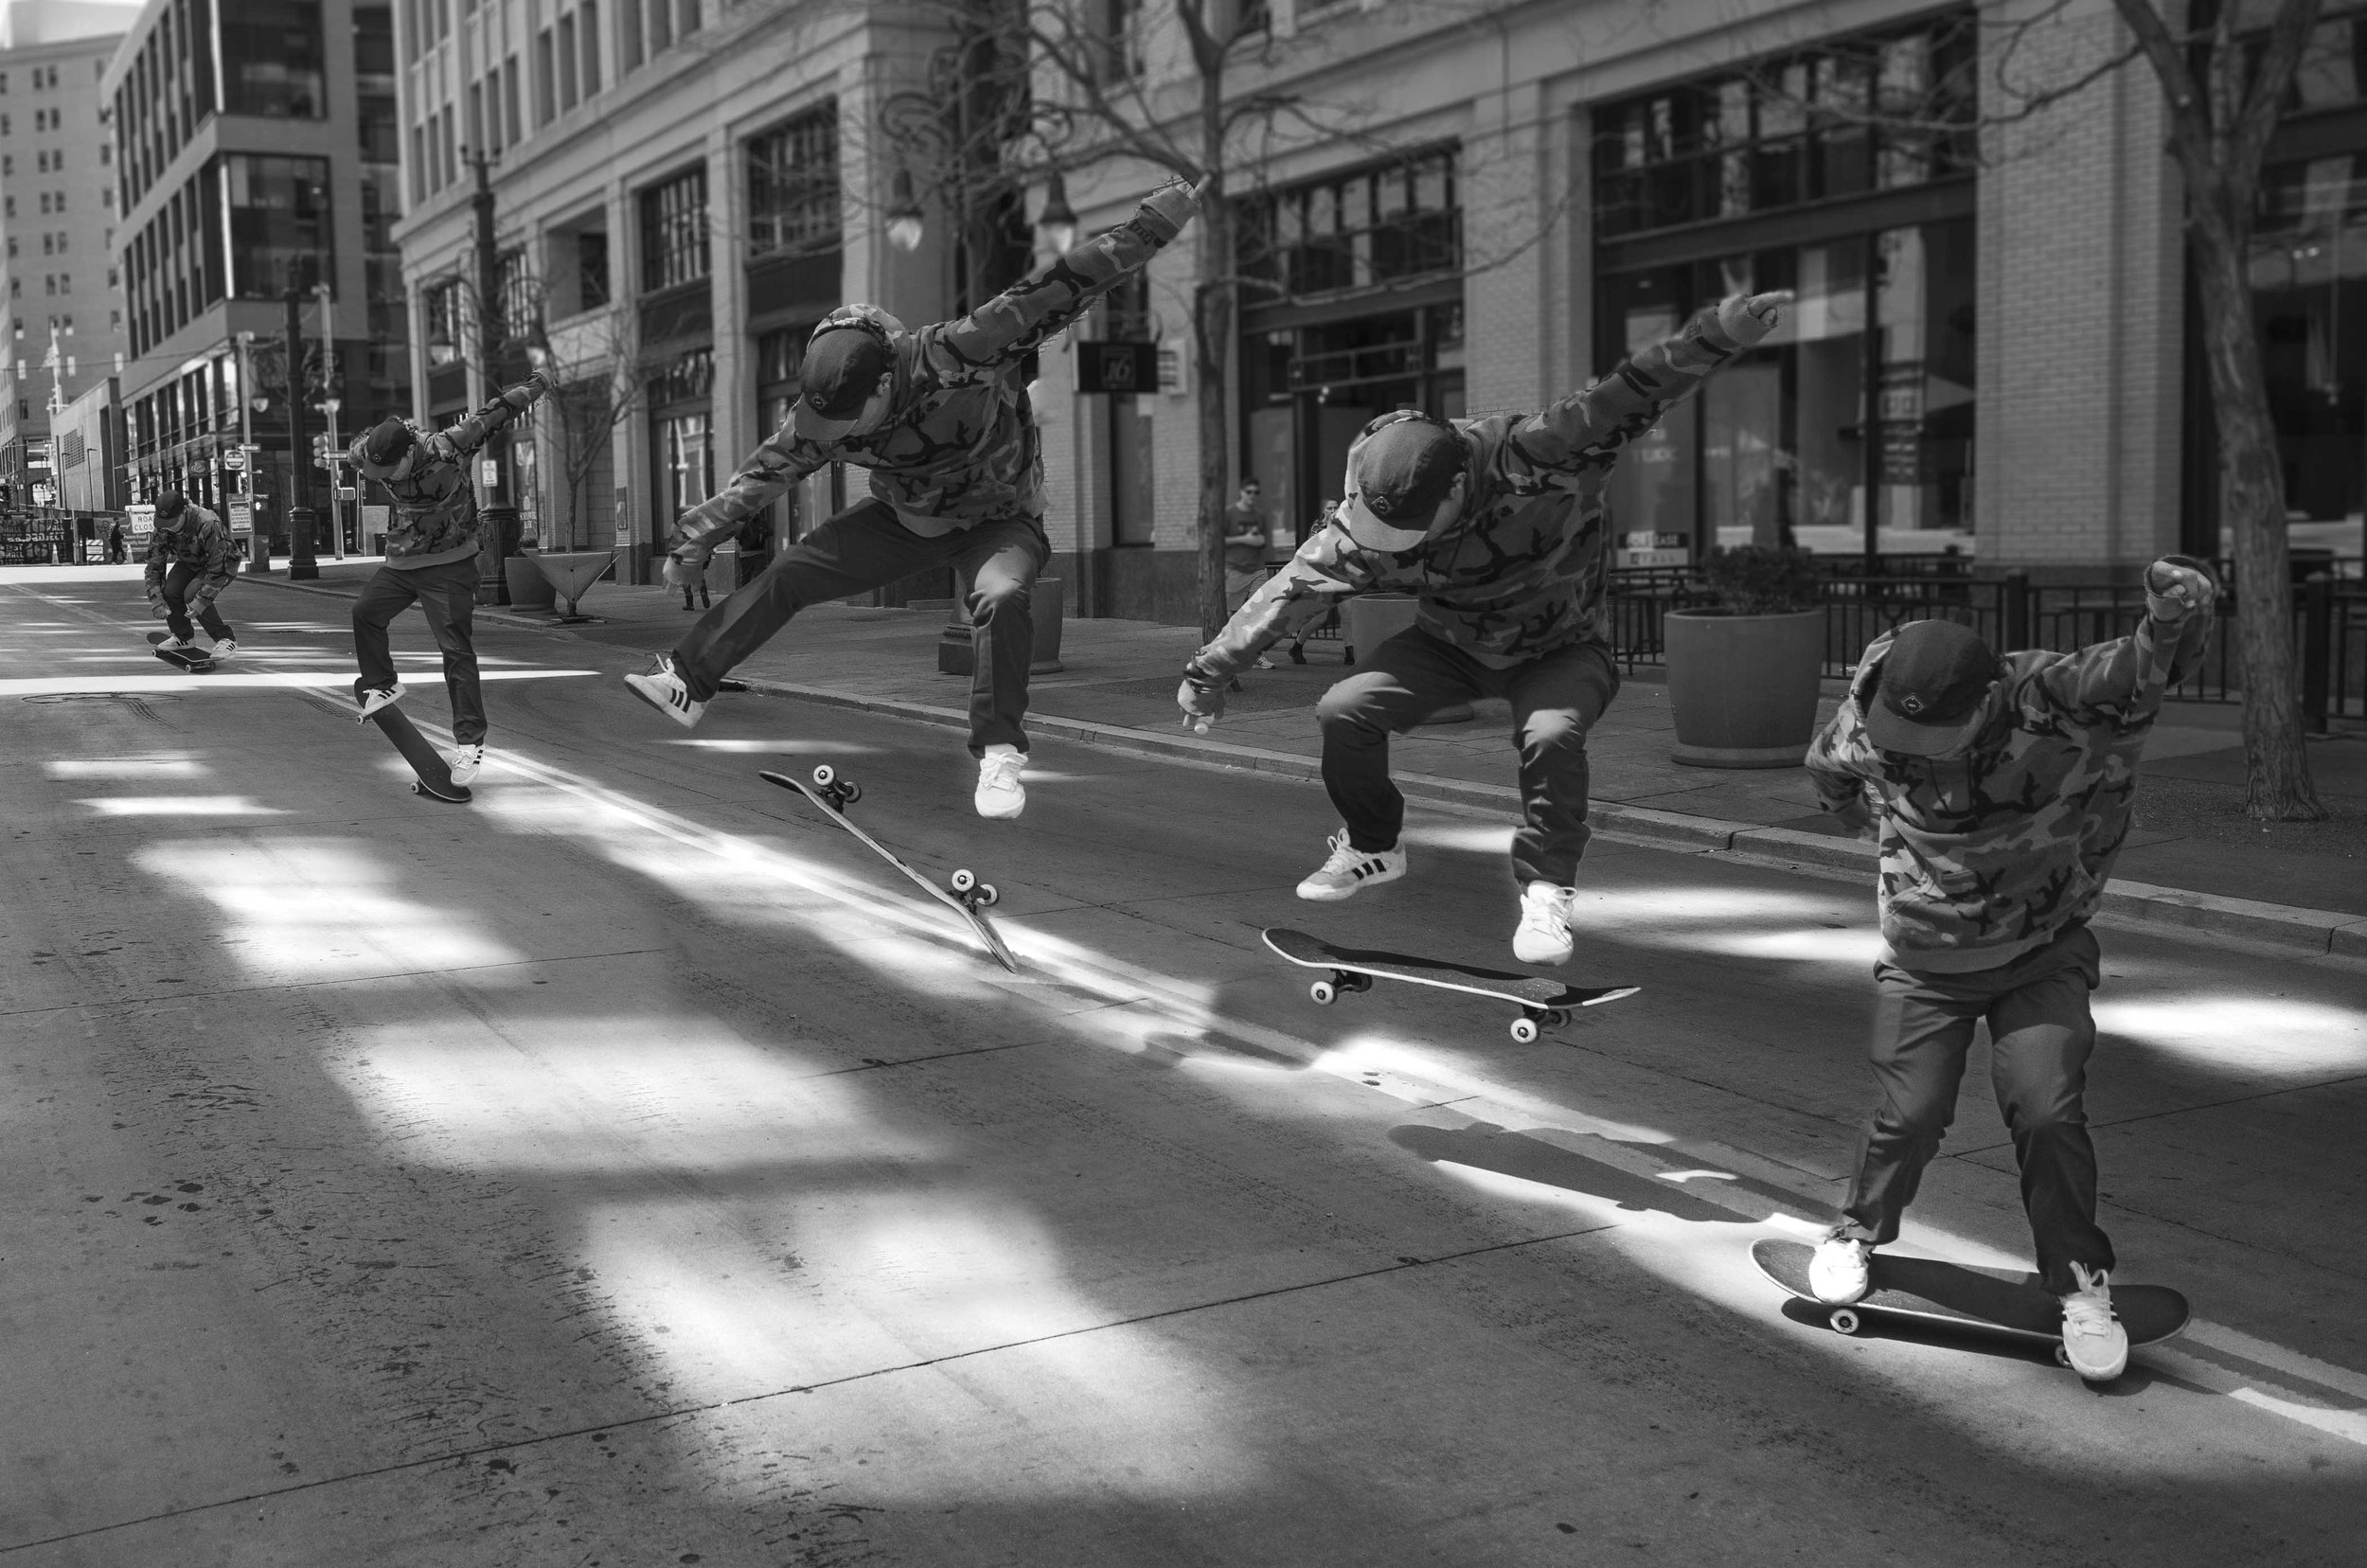  A multiple exposure image of   Jerrel Roberts   doing a skateboard ollie. 